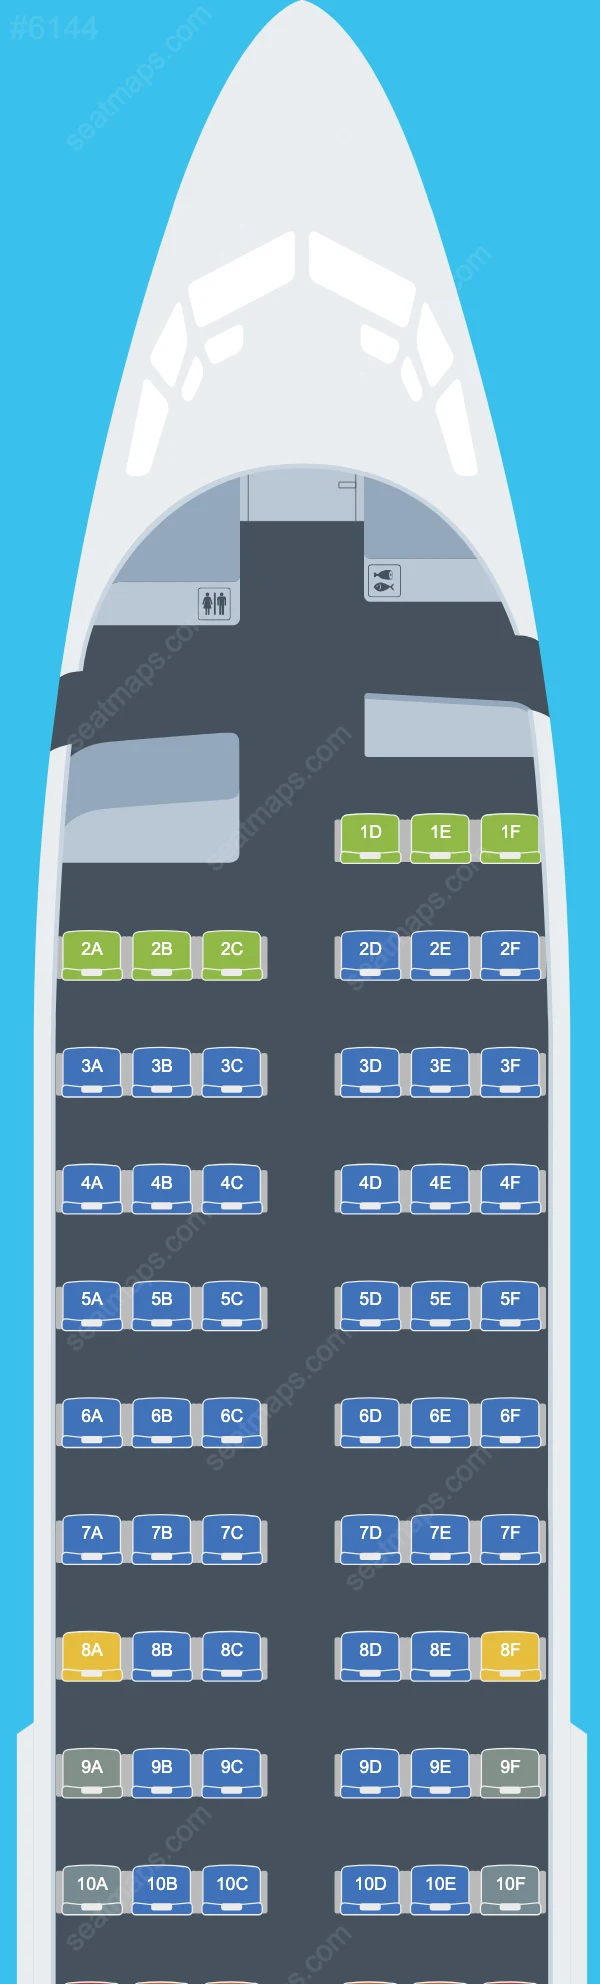 Shandong Airlines Boeing 737-700 seatmap preview